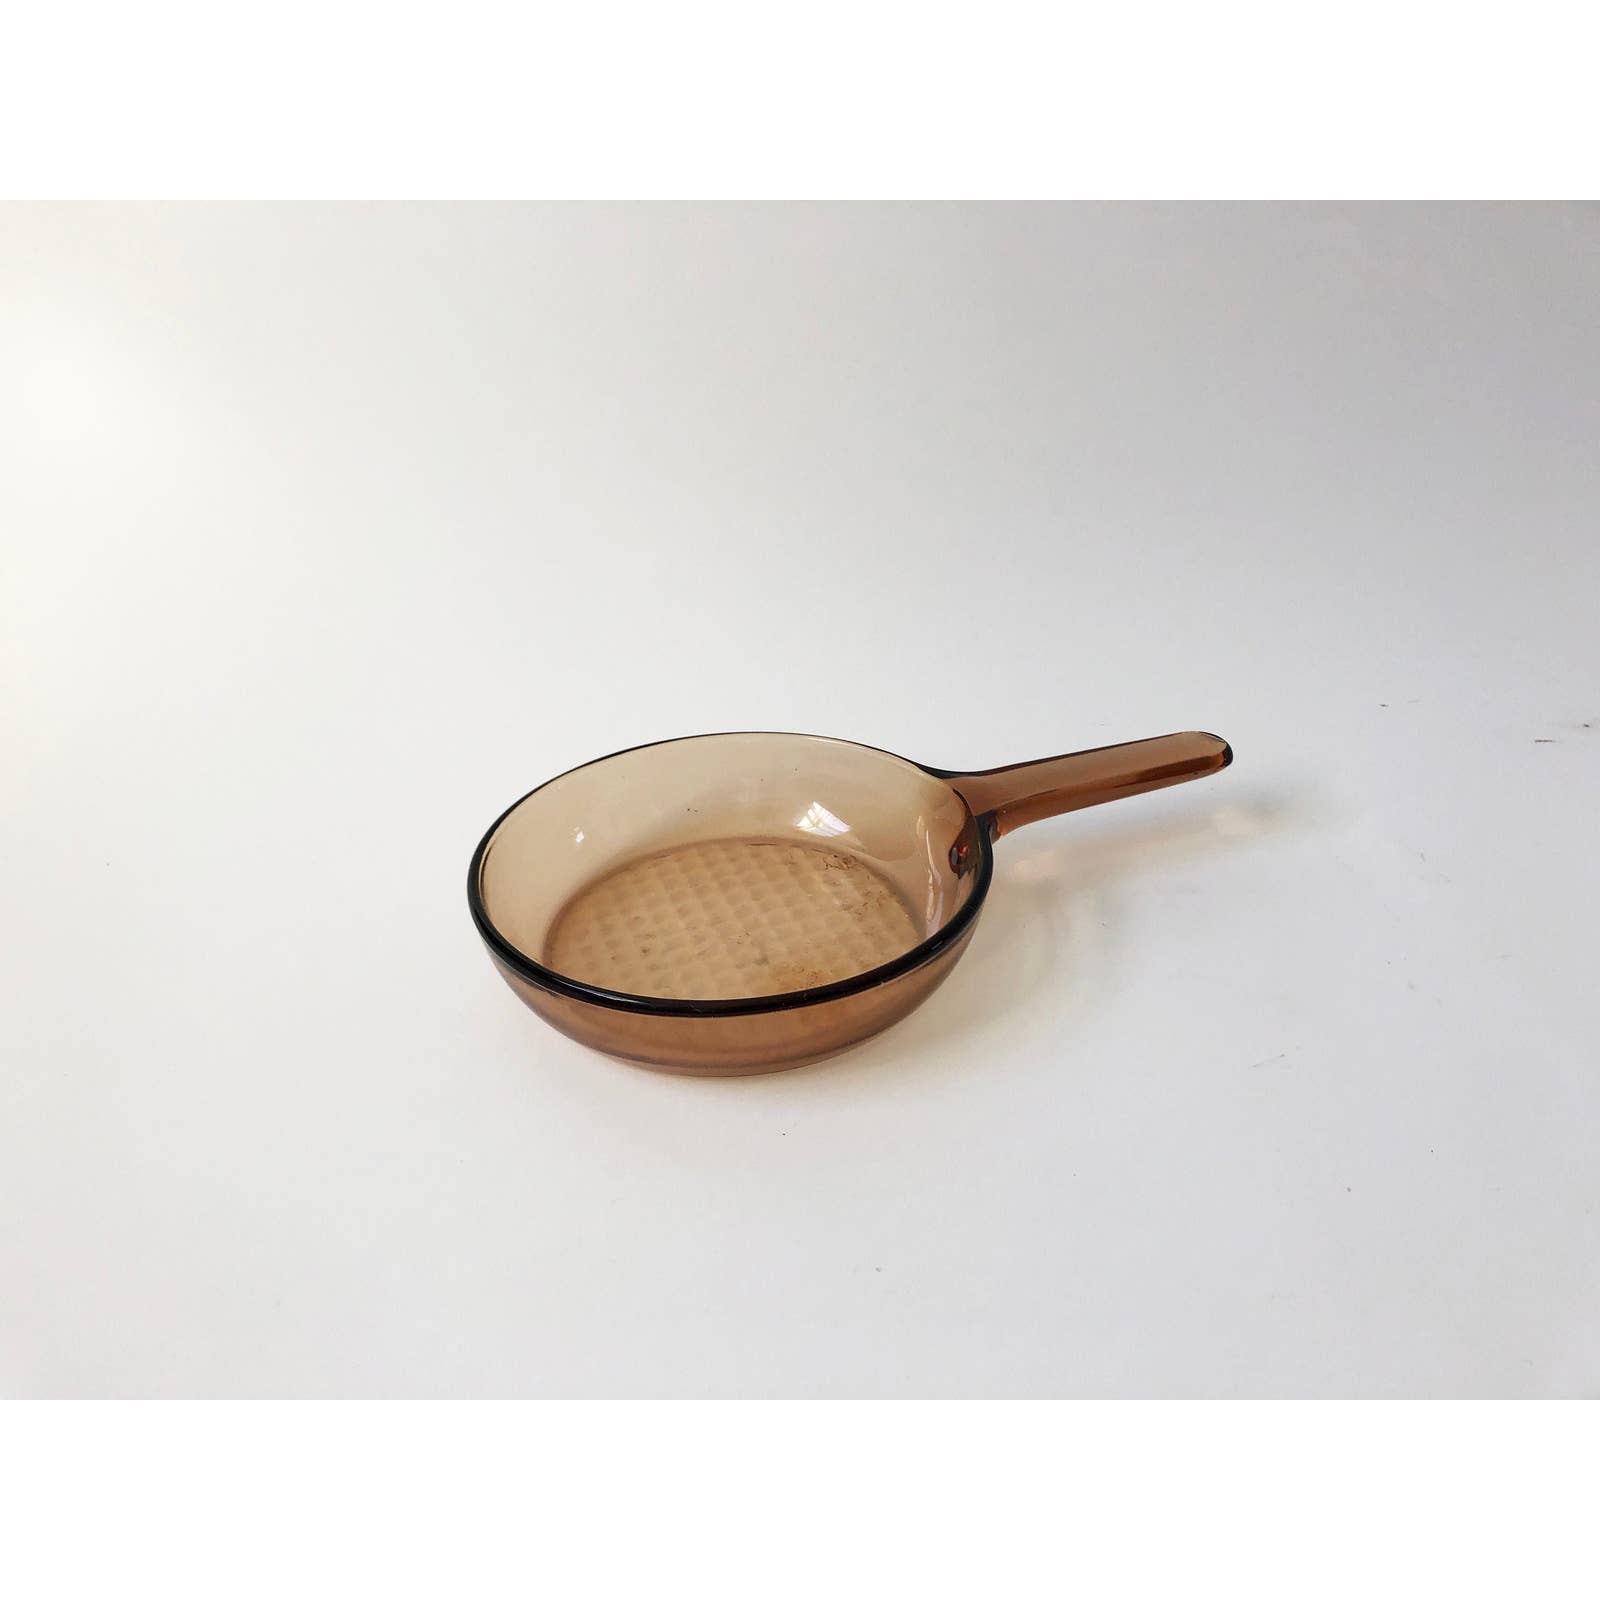 Visions Corning France Amber Glass 7 Inch Skillet Frying Pan